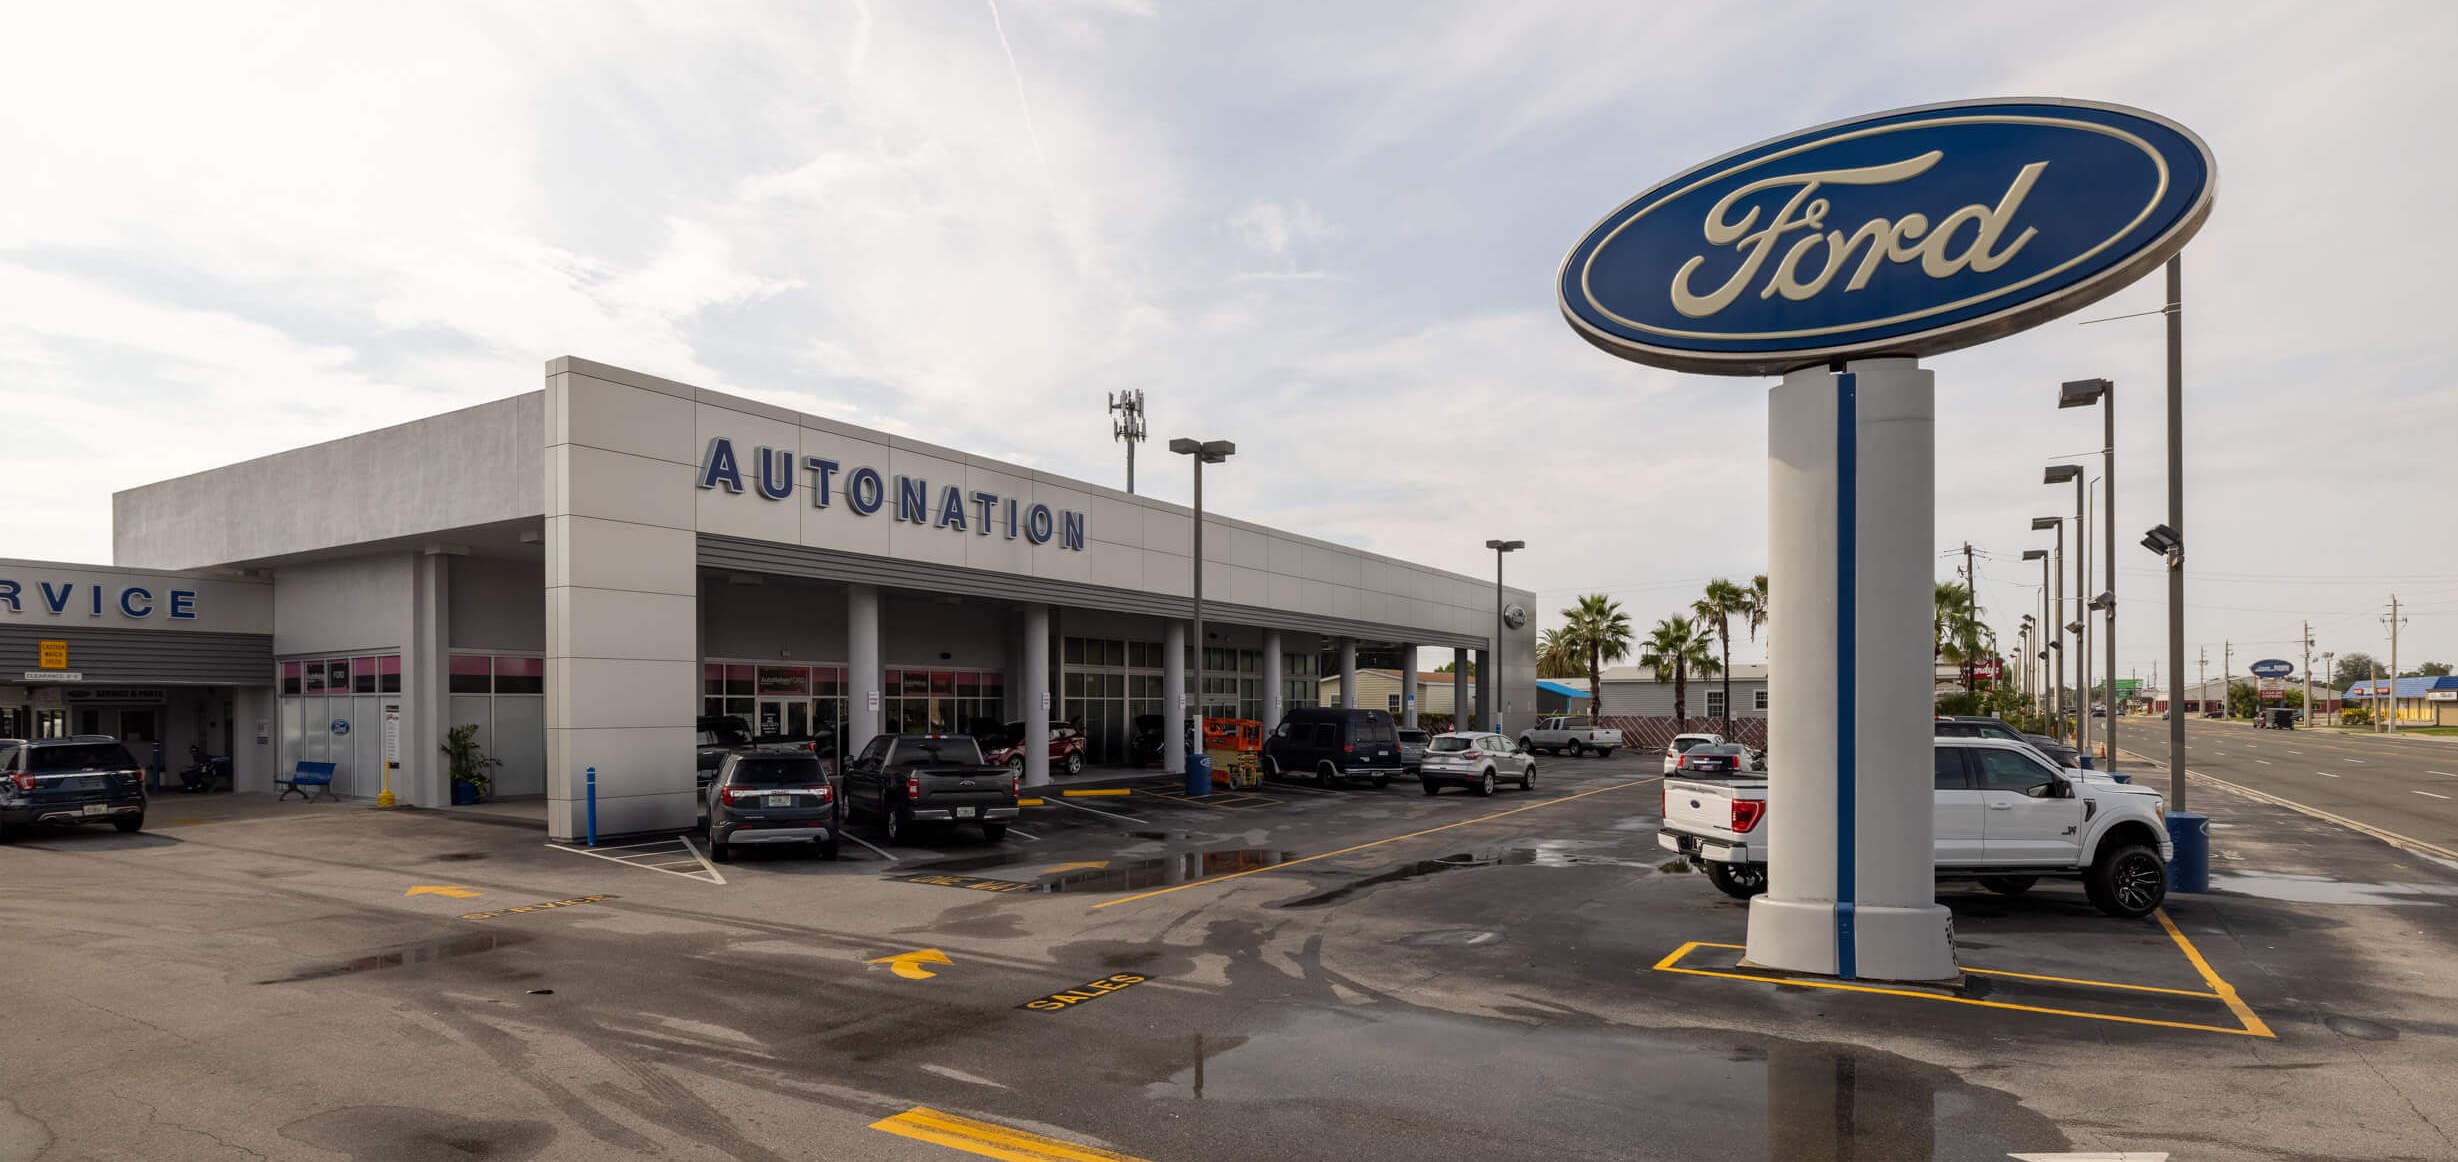 Autonation Ford Bradenton exterior with large Ford sign